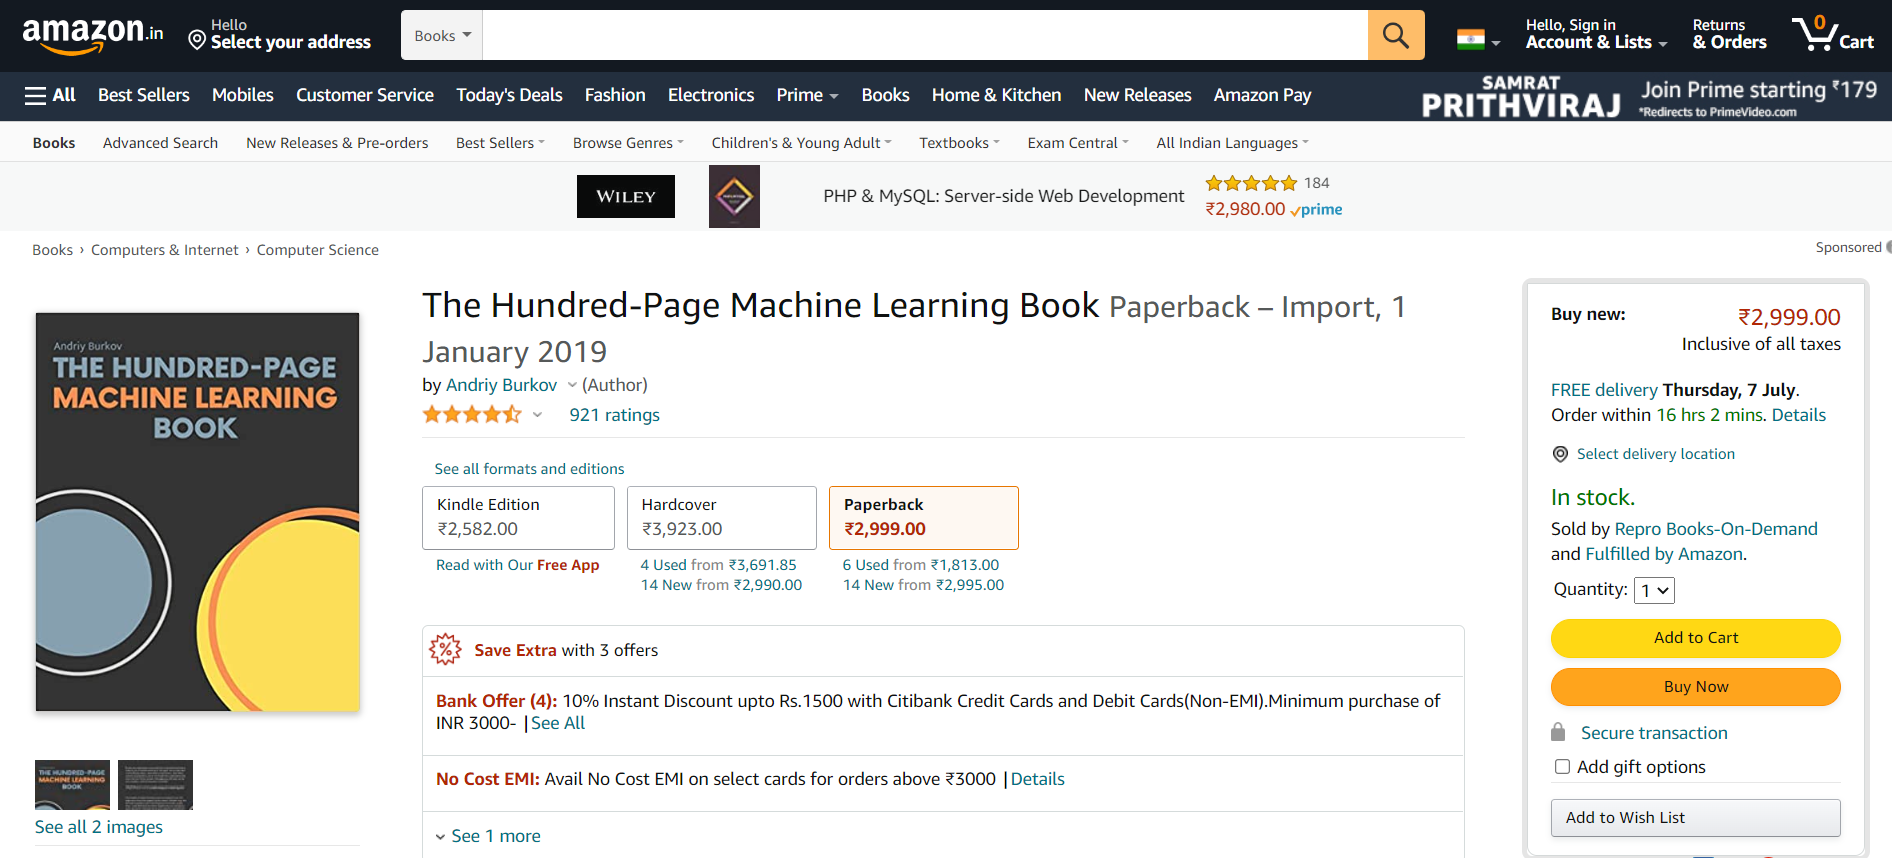 The Hundread Page Machine Learning Book